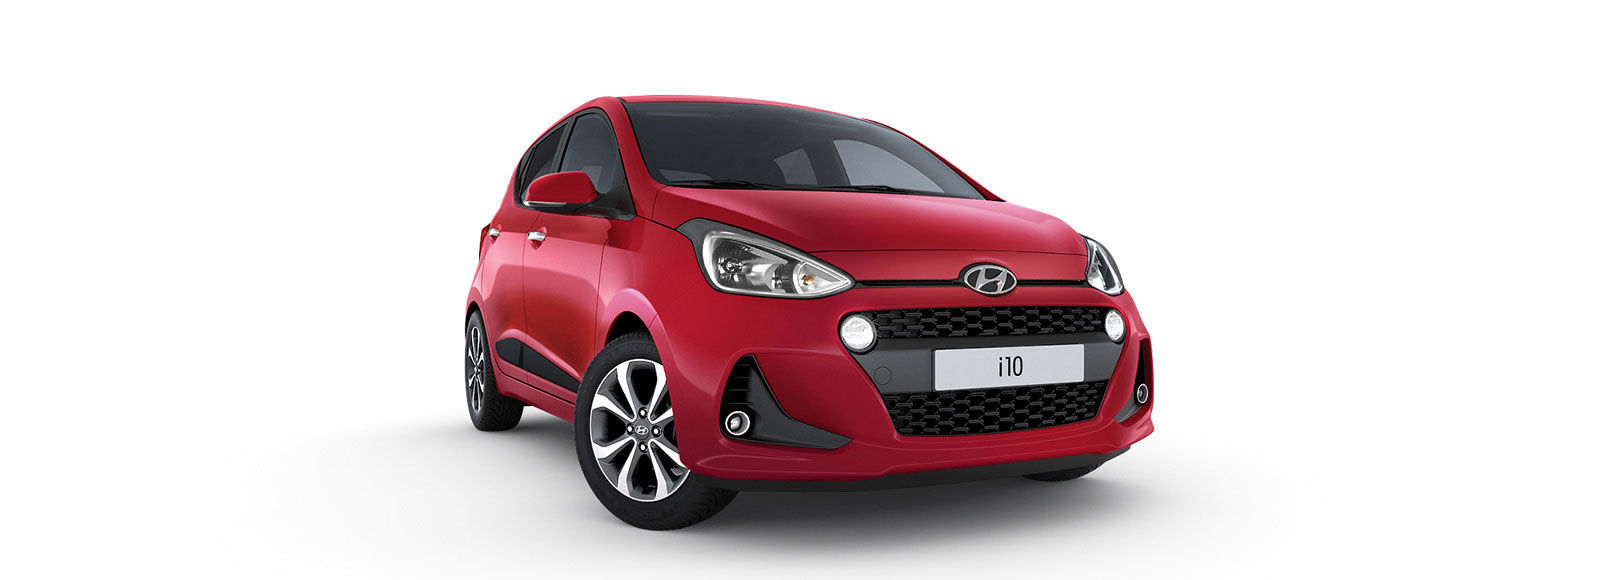 Front view of red i10